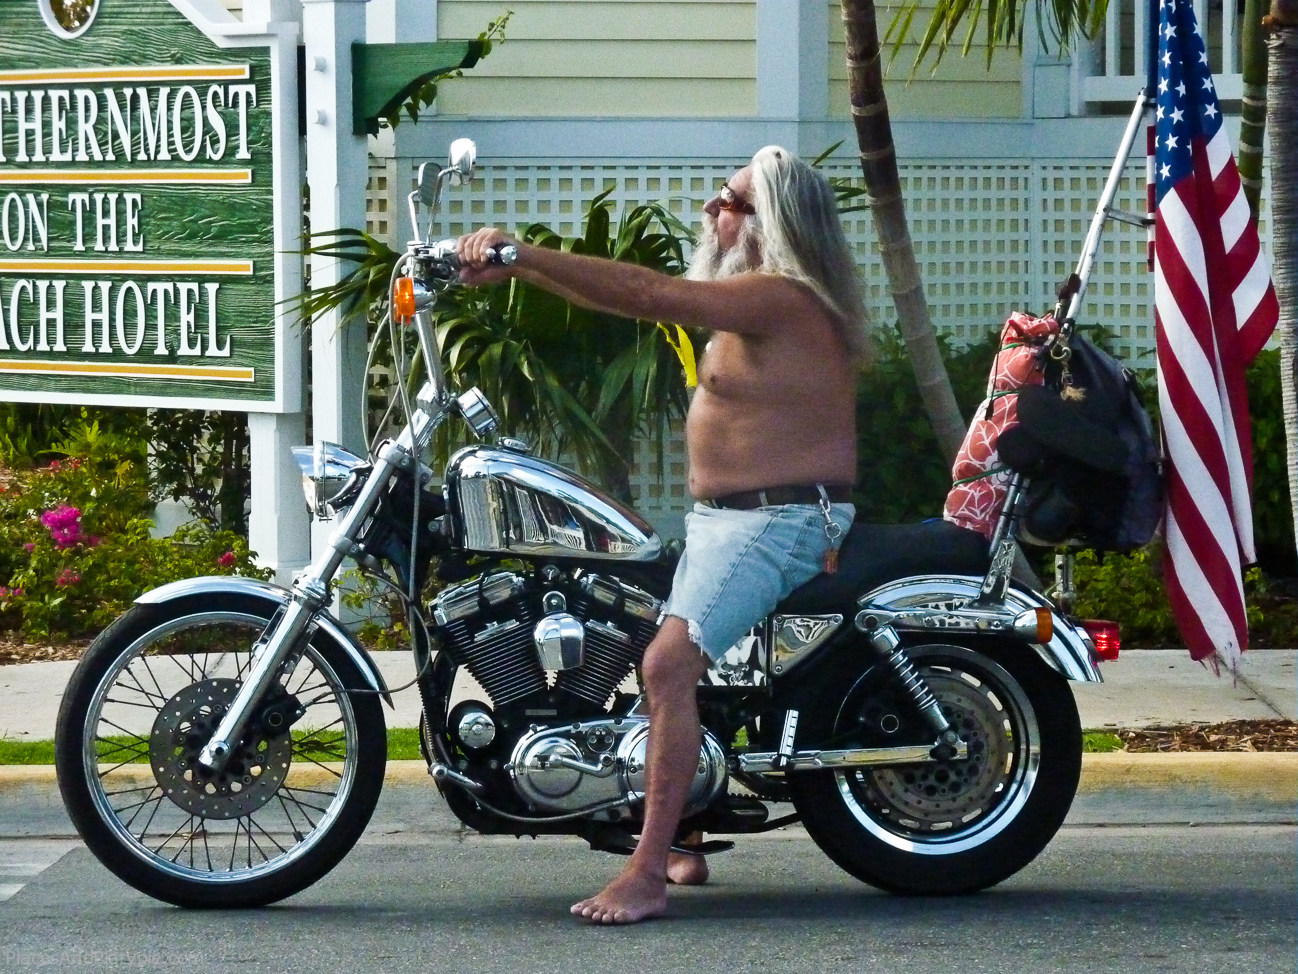 In Key West, it's white cut-offs and bare feet instead of black leather and heavy boots.